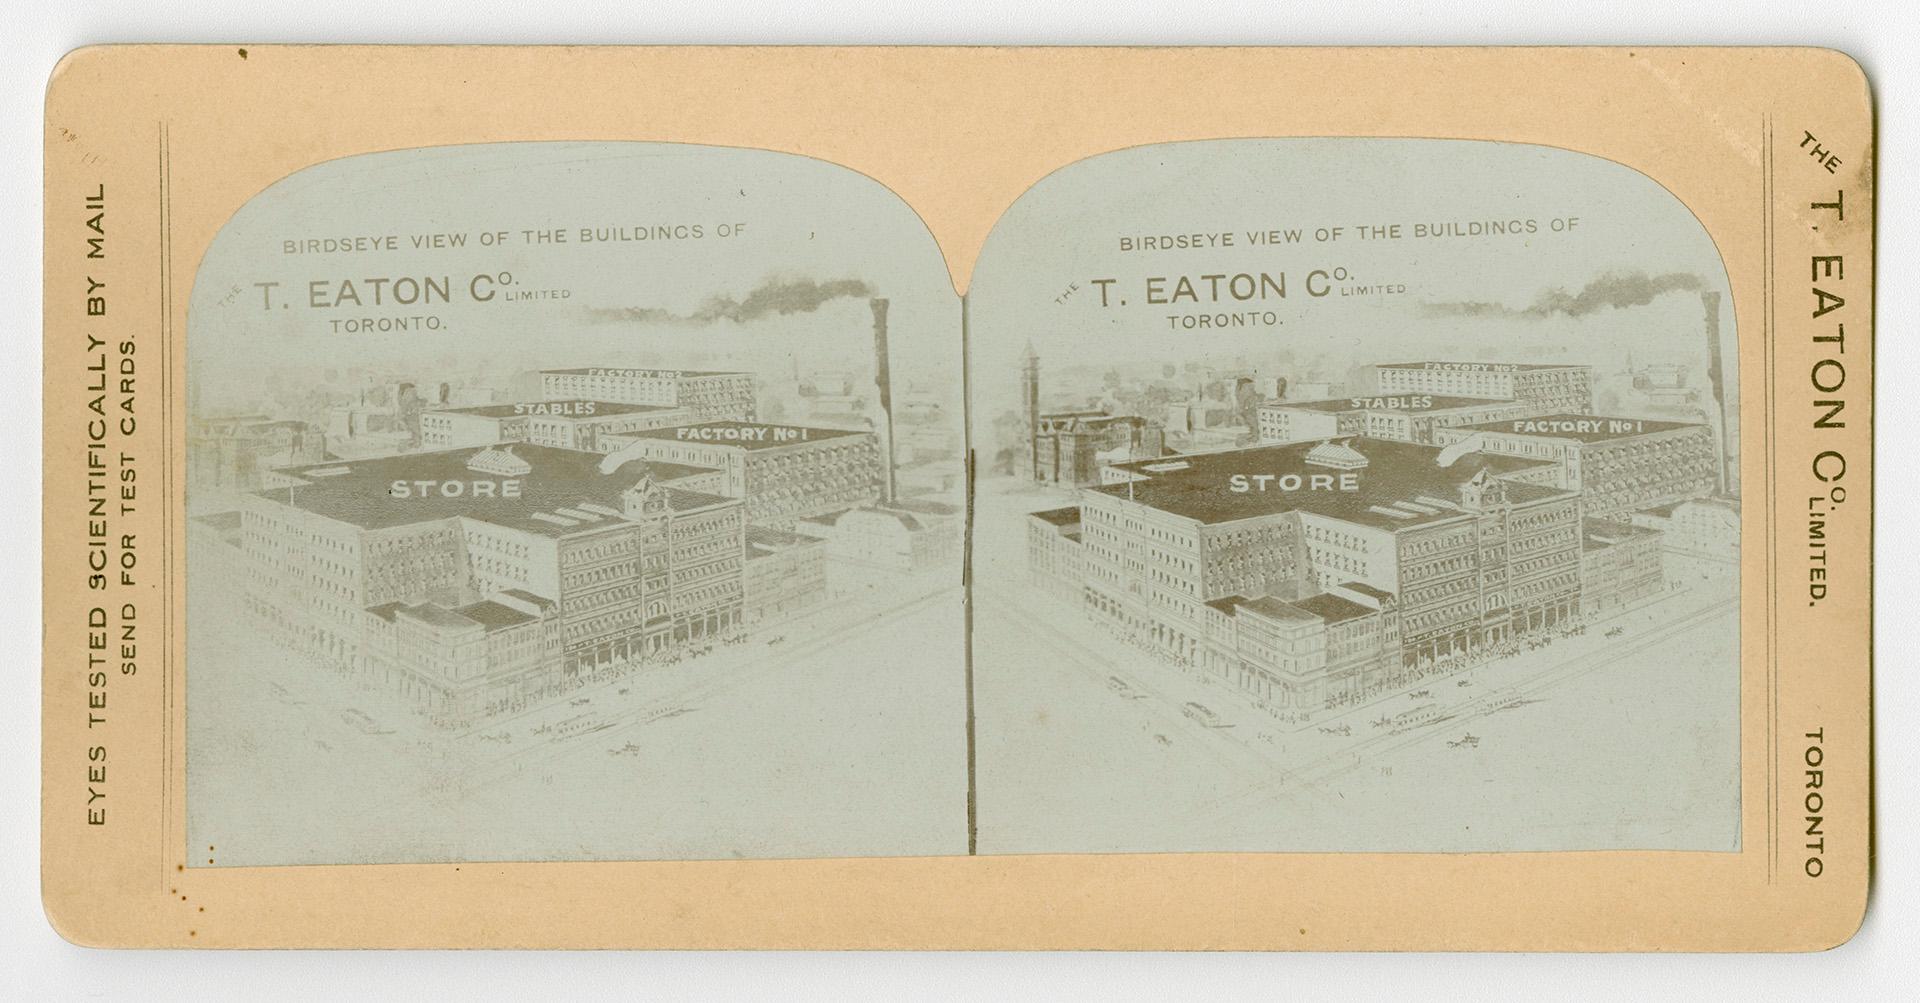 Pictures show a birds-eye view of a large department store and factory complex.